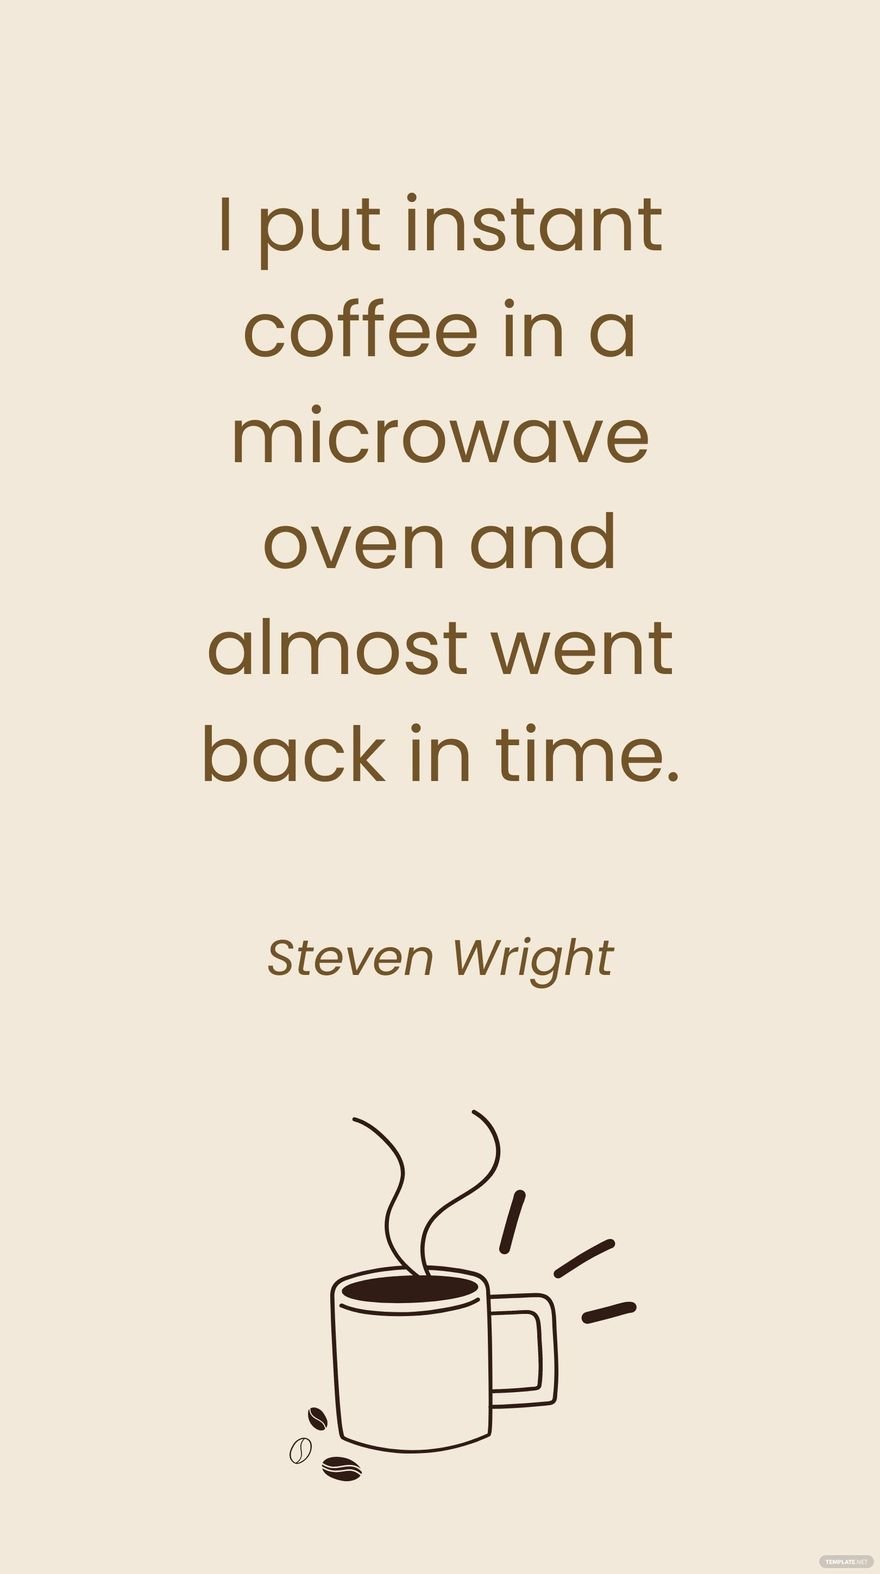 Steven Wright - I put instant coffee in a microwave oven and almost went back in time.